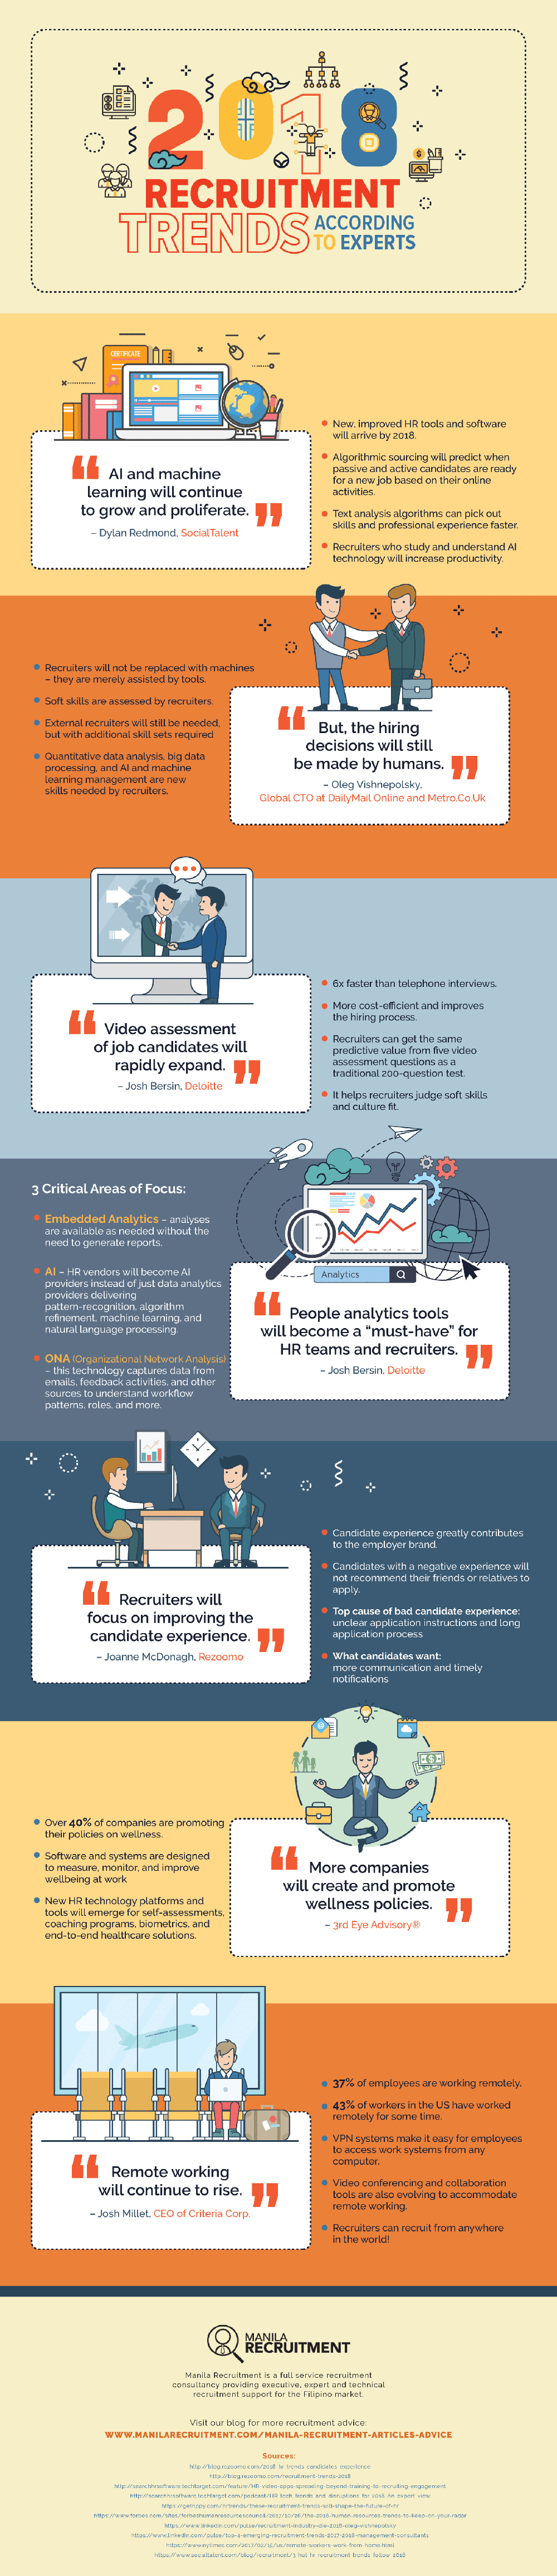 [Infographic] 2018 Recruitment Trends According to Experts